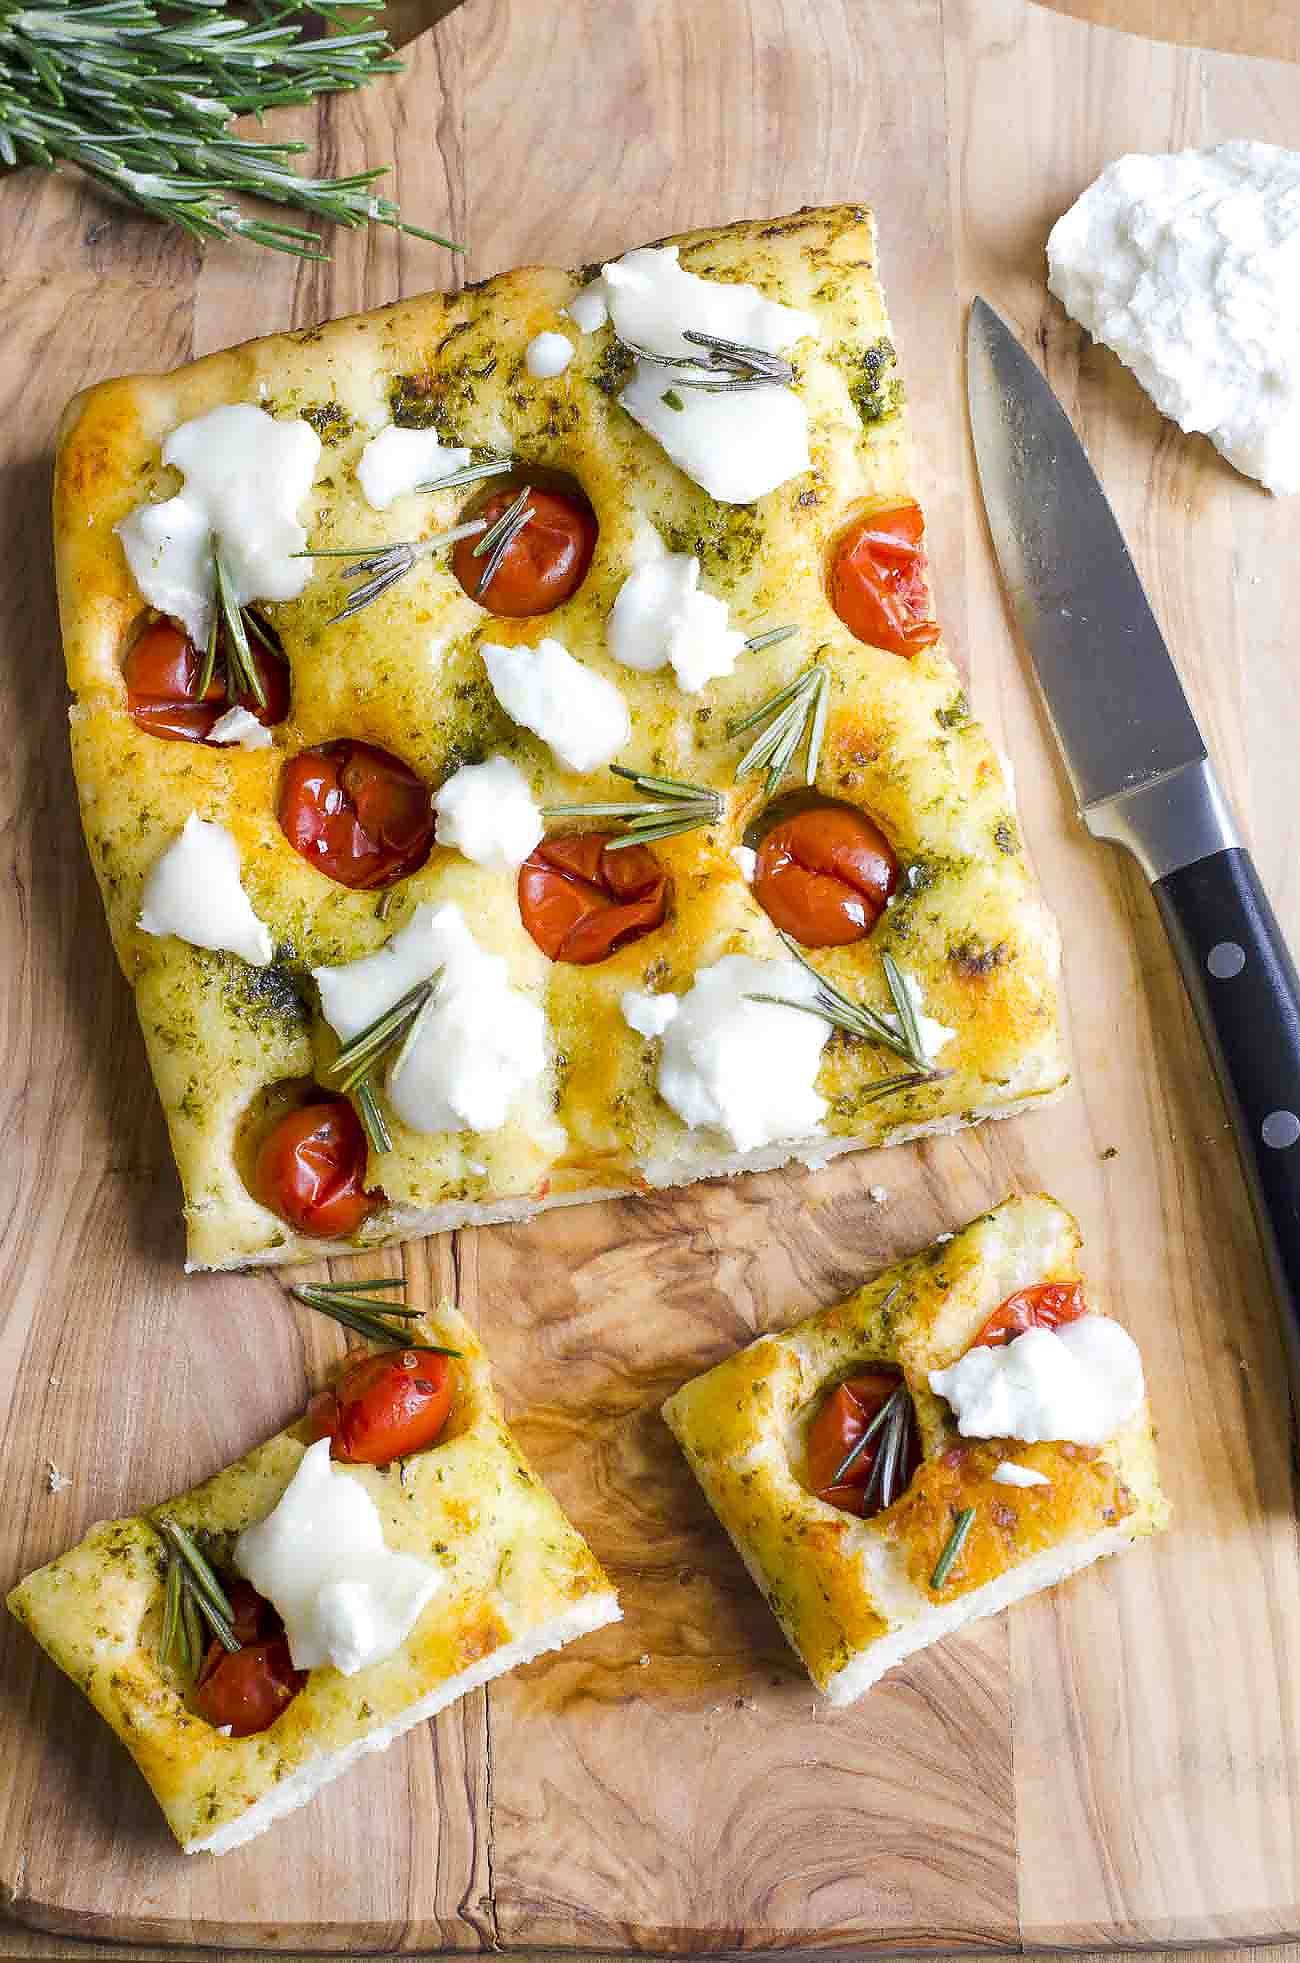 Focaccia Bread Recipe With Cherry Tomatoes, Basil Pesto And Goat Cheese ...